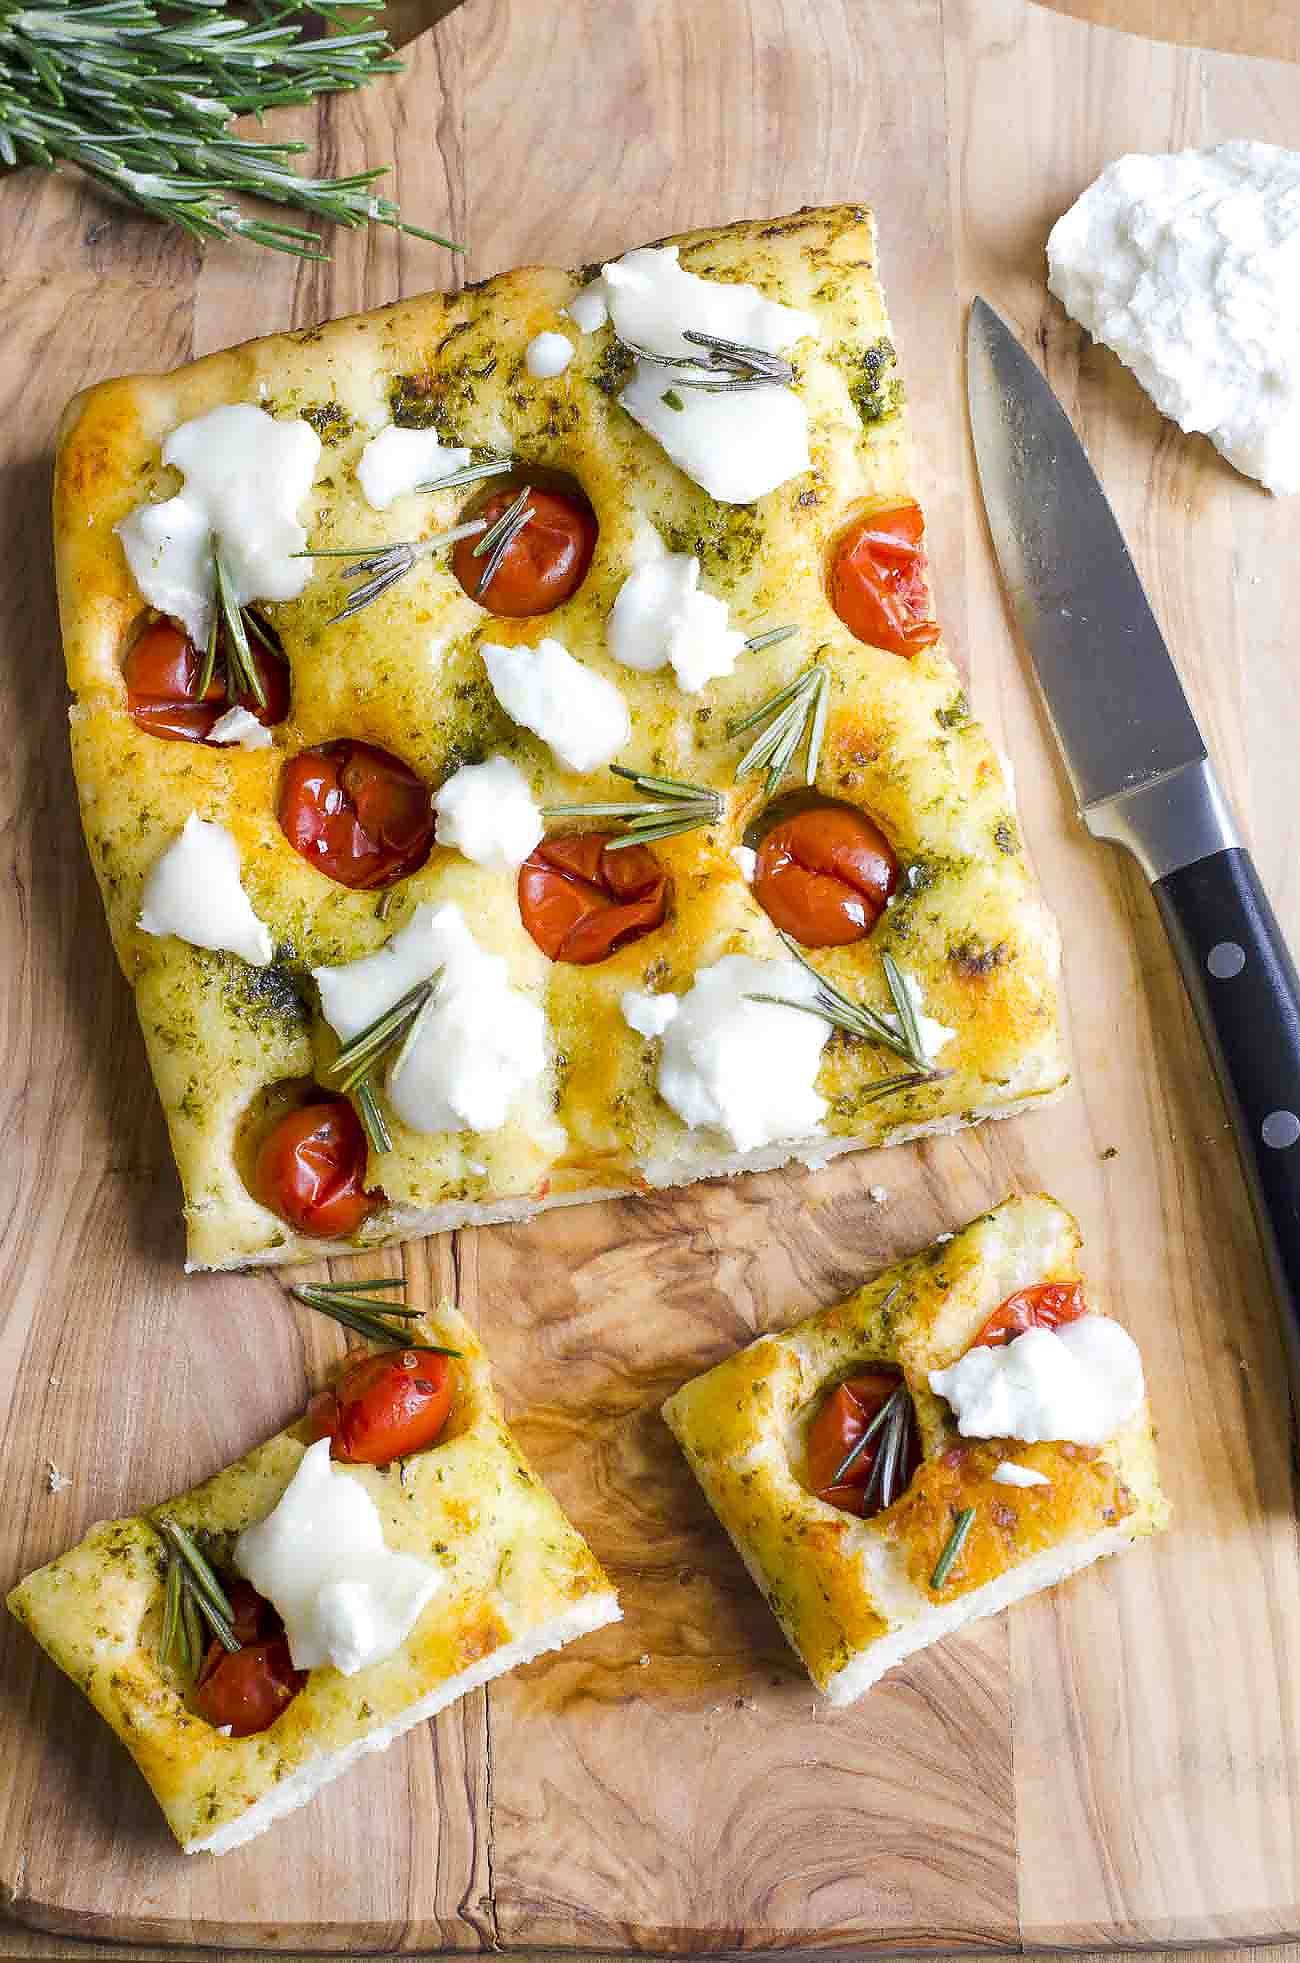 Focaccia Bread Recipe With Cherry Tomatoes, Basil Pesto And Goat Cheese ...